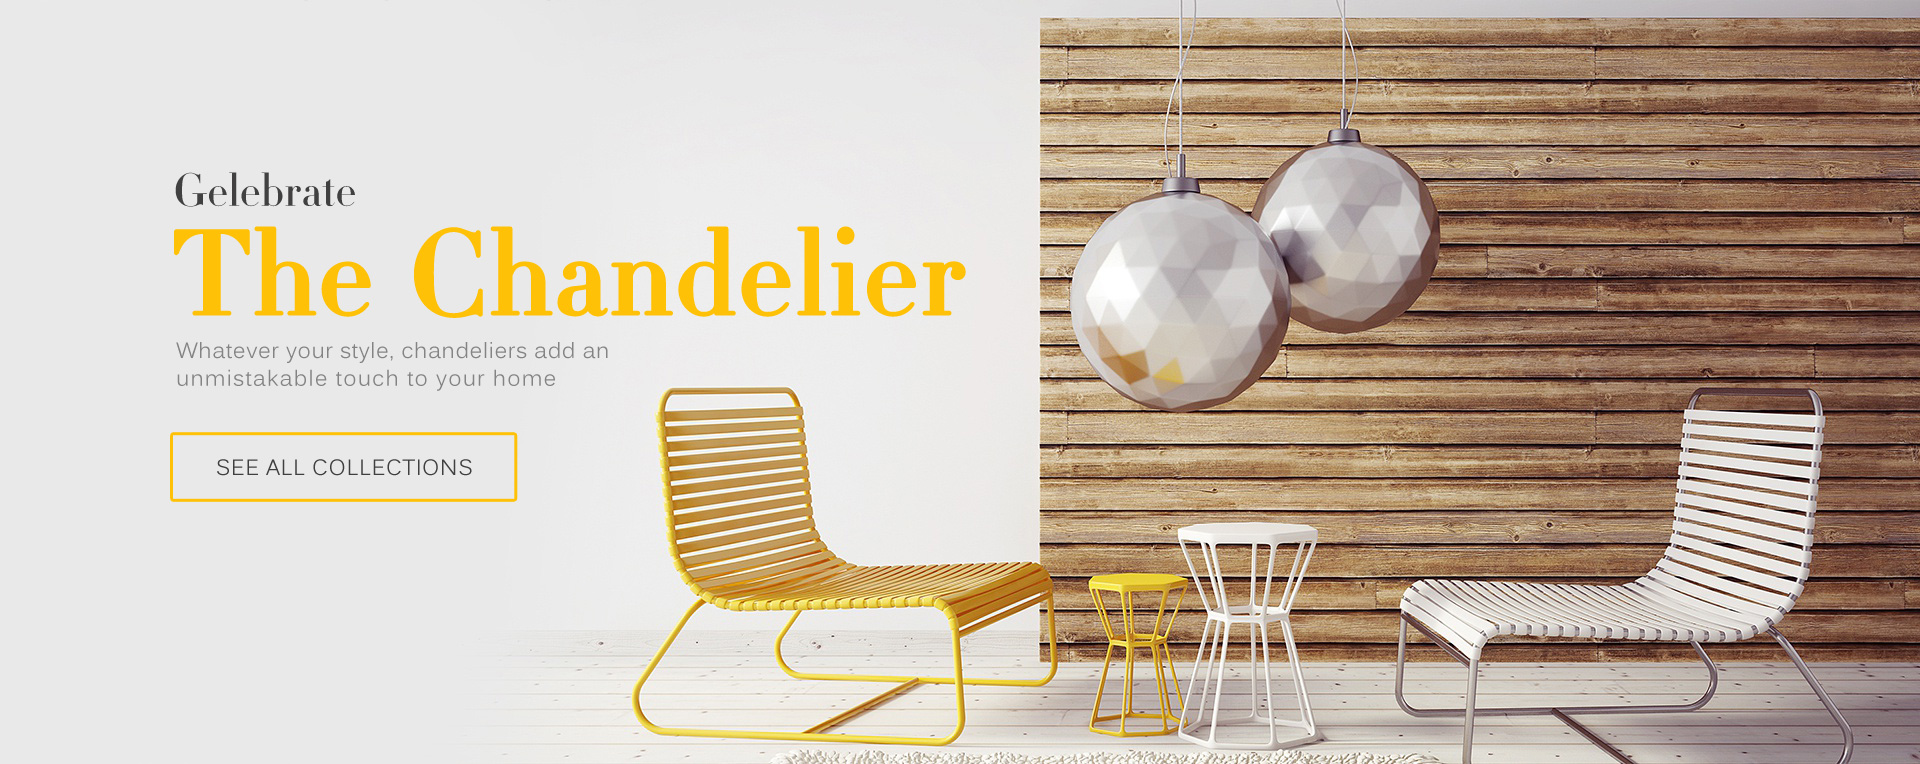 Parallax scrolling effect gives your slider the extra oomph it needs. banner不限张数